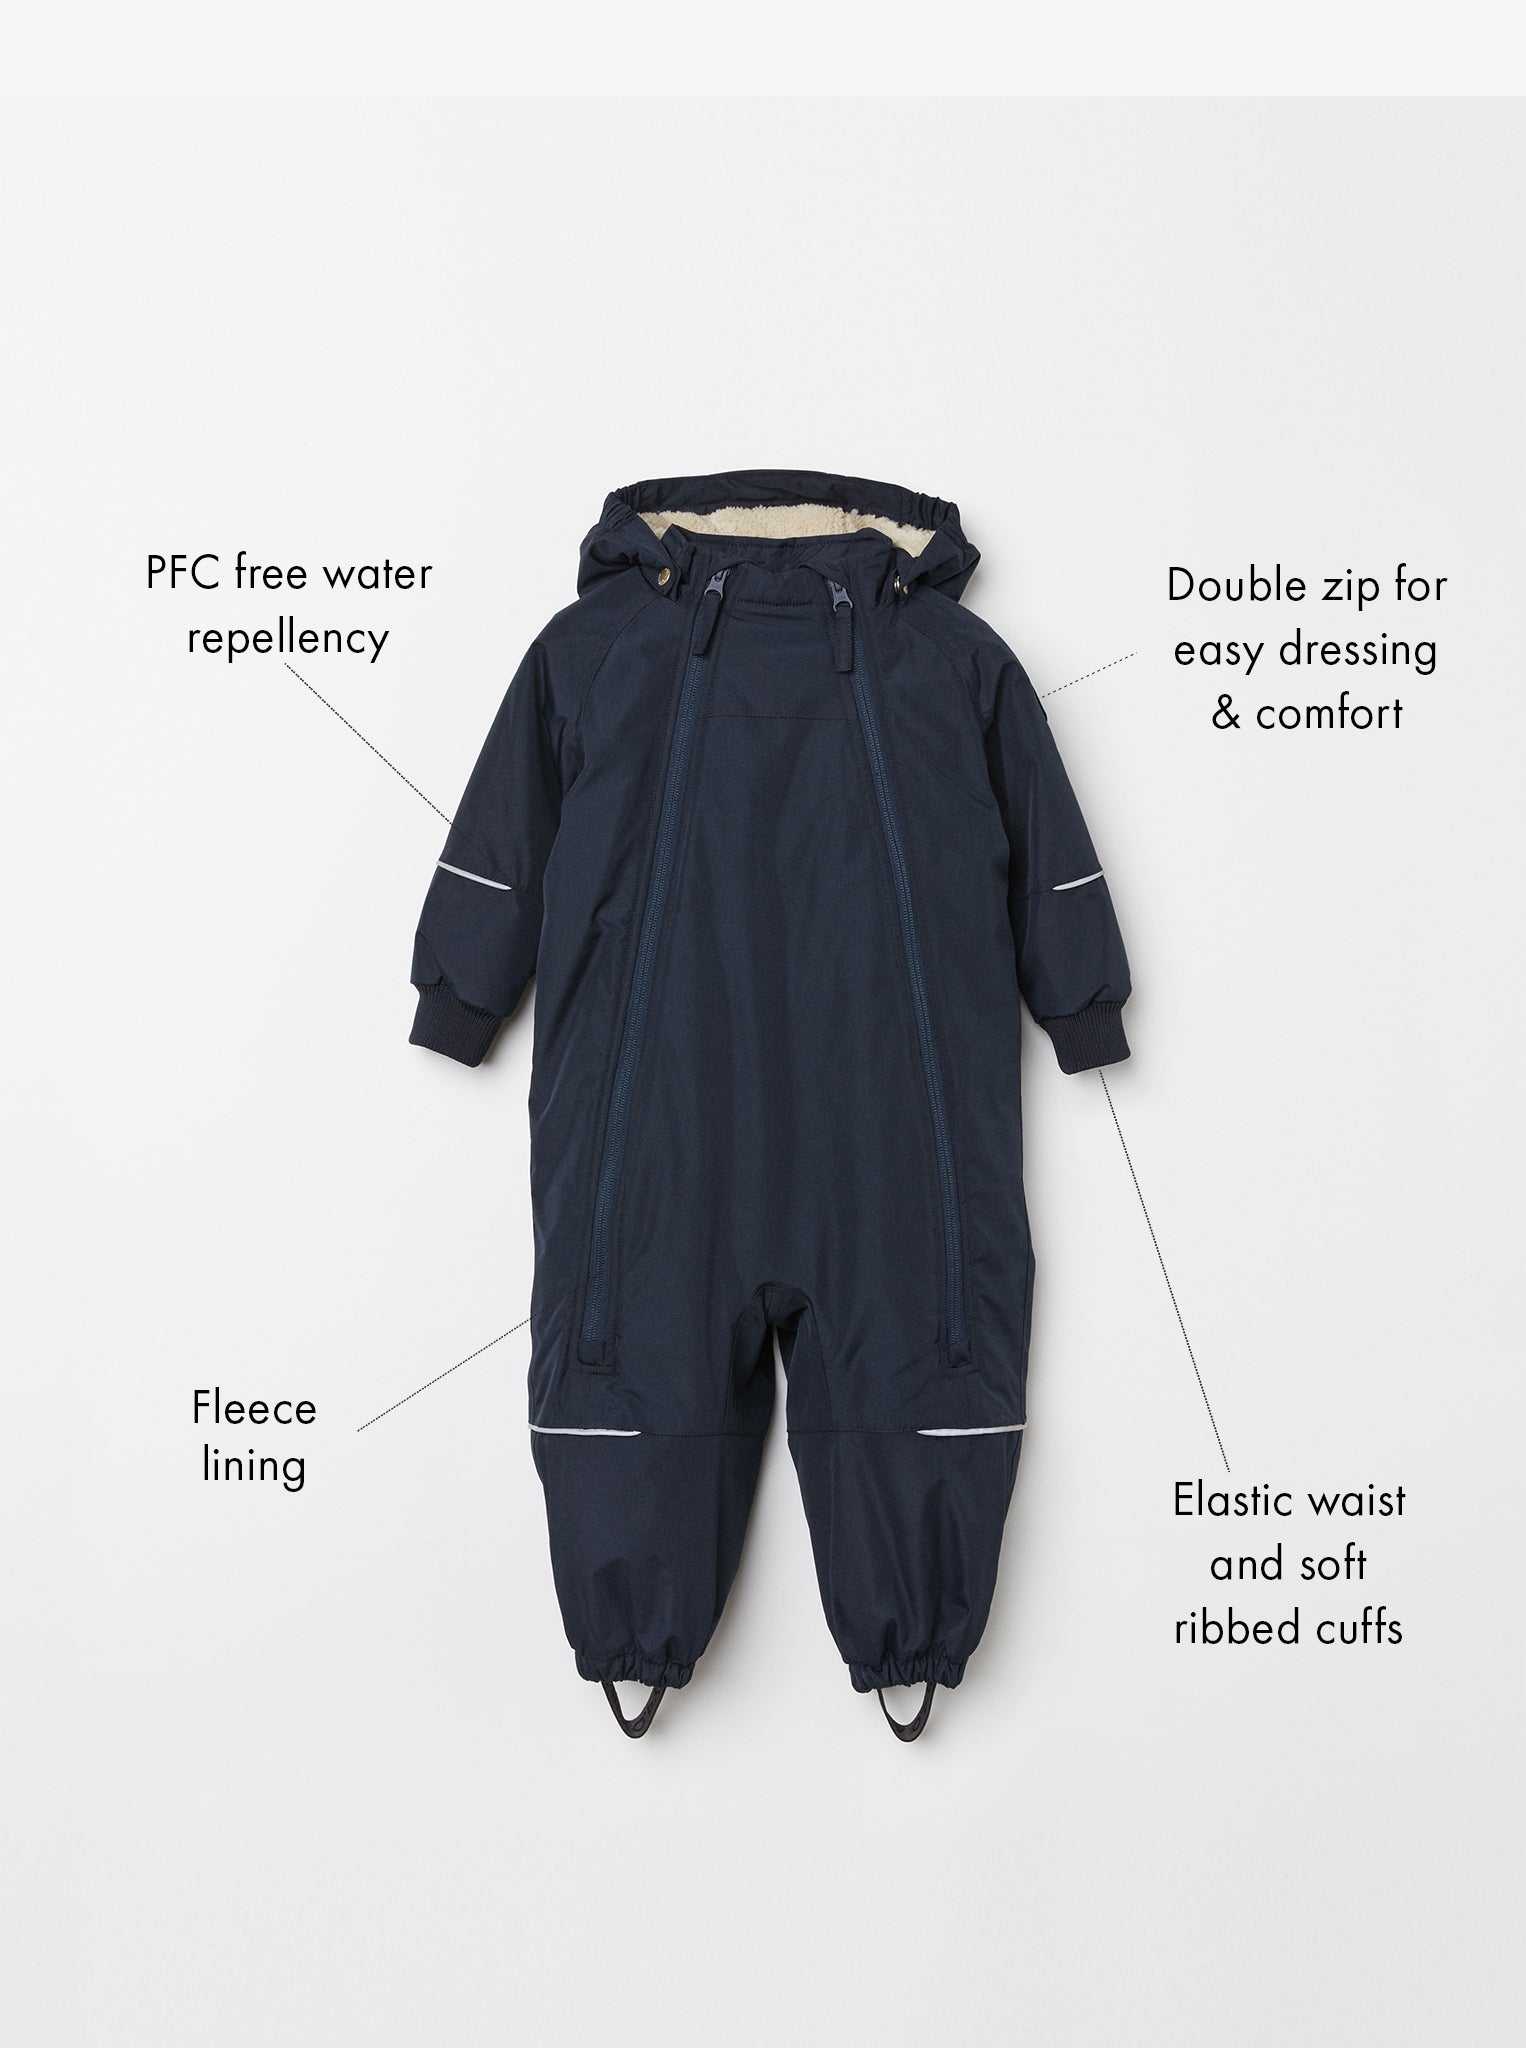 Padded Waterproof Baby Overall